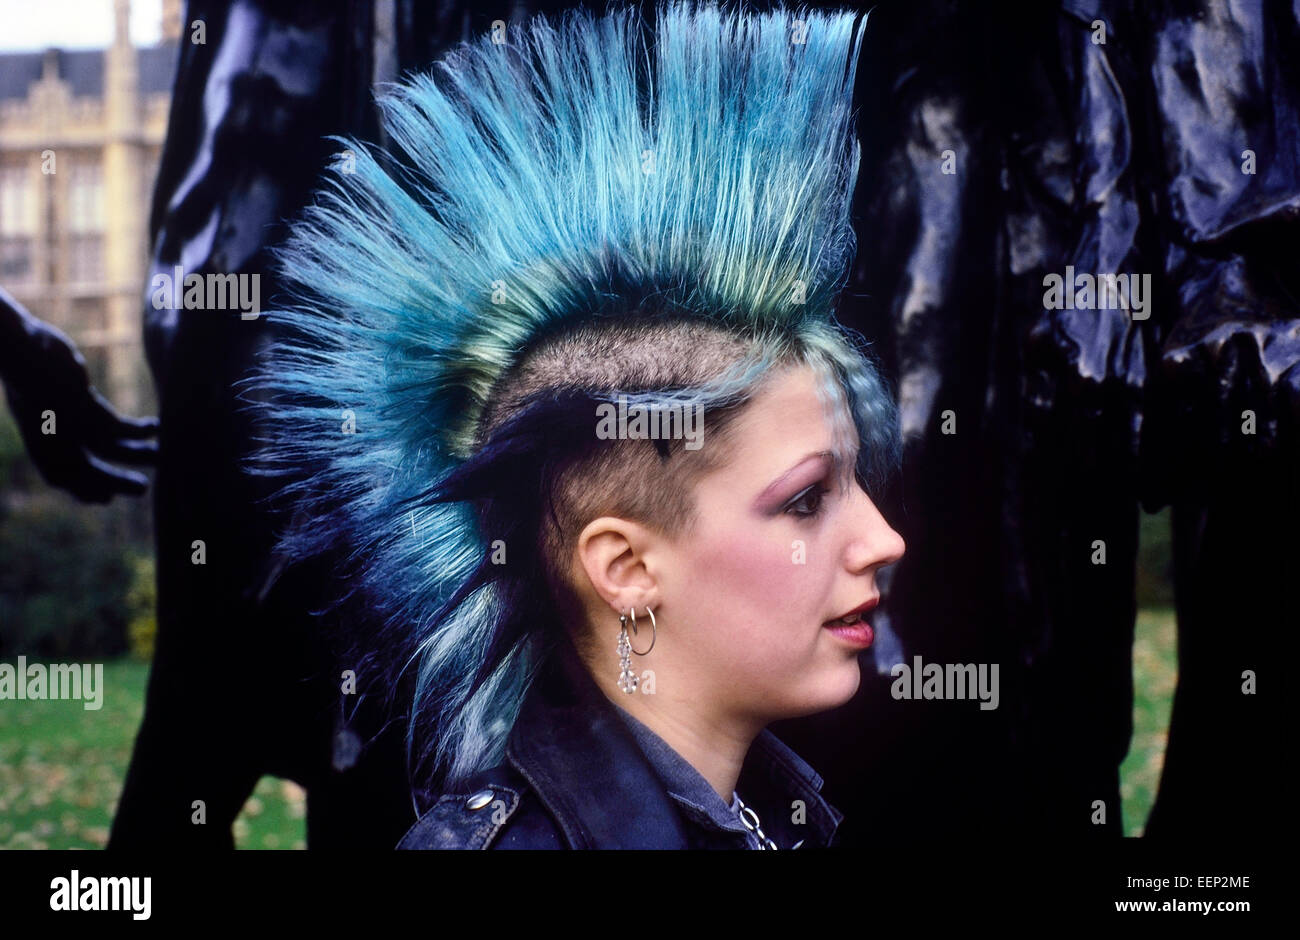 Blue hair punk girls: the ultimate style inspiration - wide 7